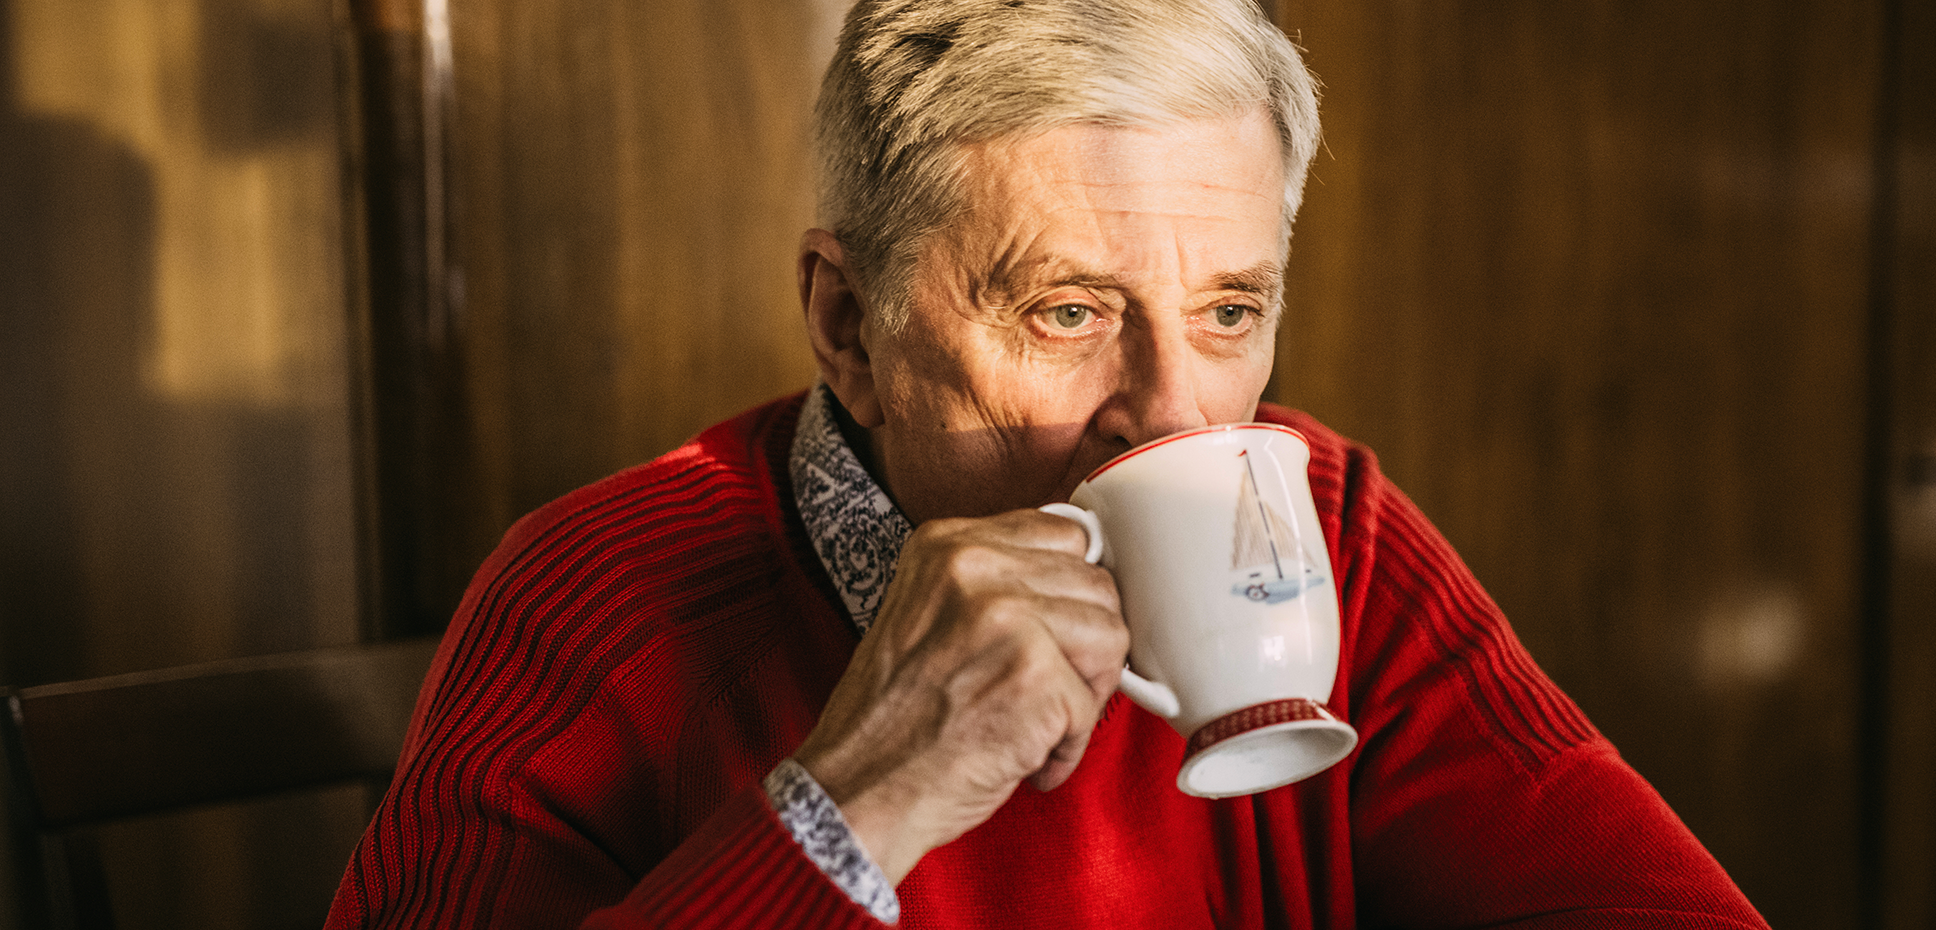 An older man wearing a bright red sweater pensively sips a cup of coffee.